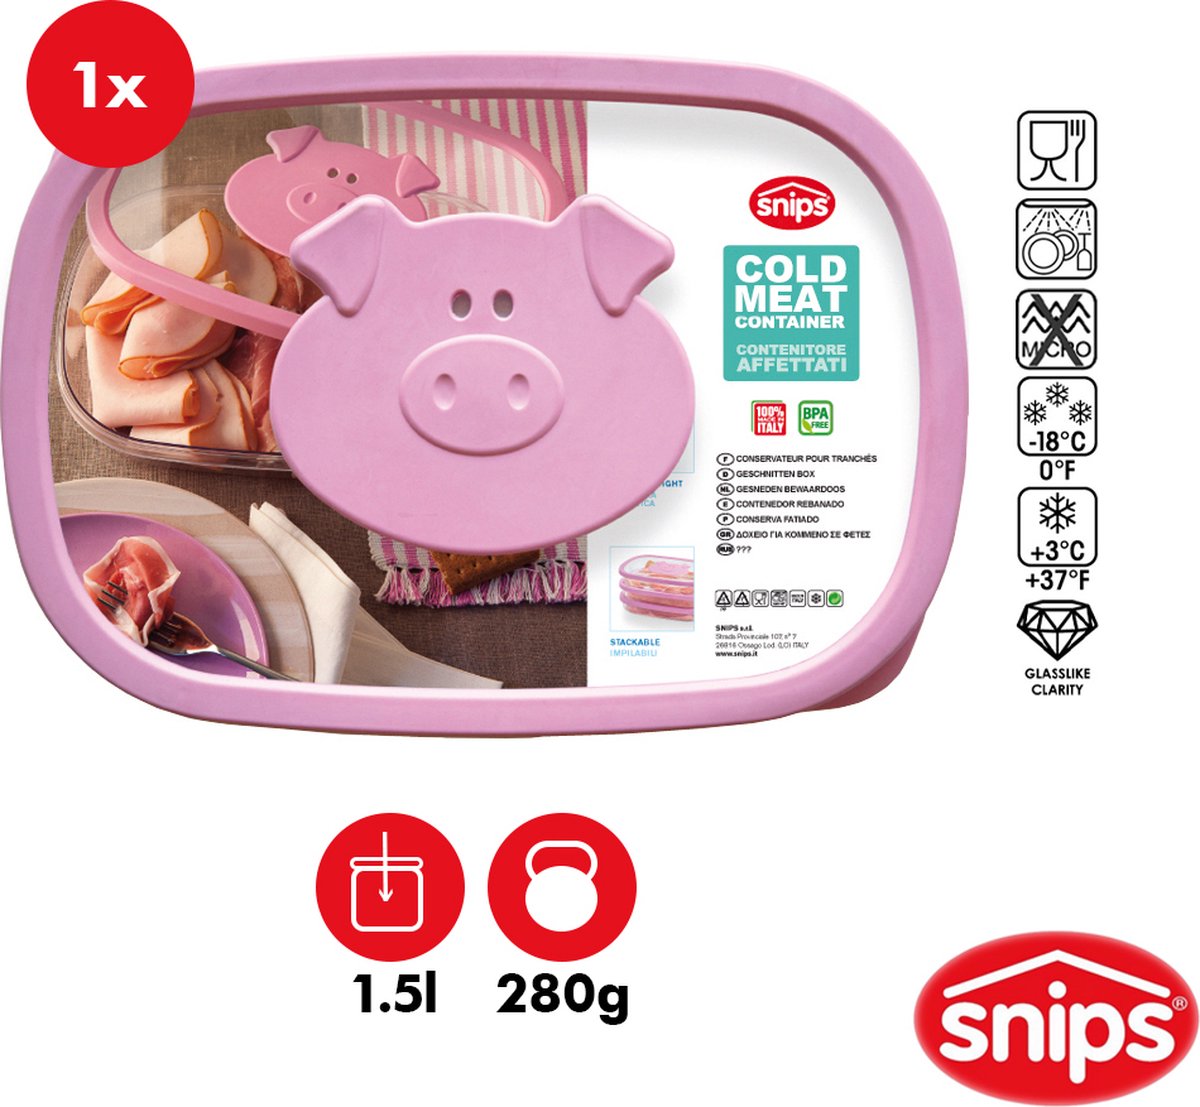 Lunchbox Snips Cold Meat Saver | bol.com